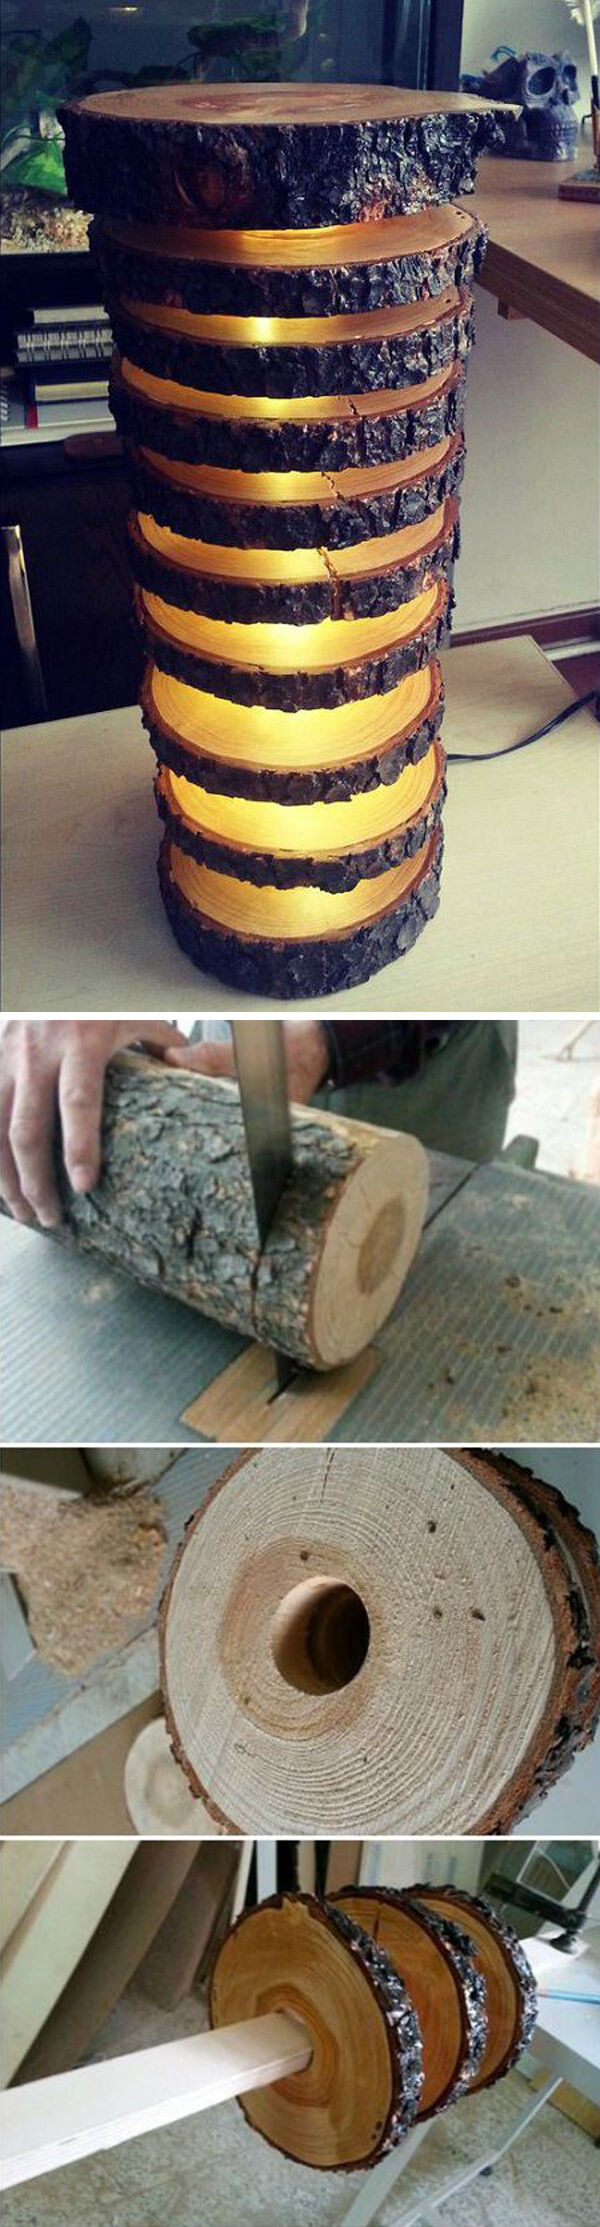 Popular Wood Crafts
 32 Best DIY Wood Craft Projects Ideas and Designs for 2019